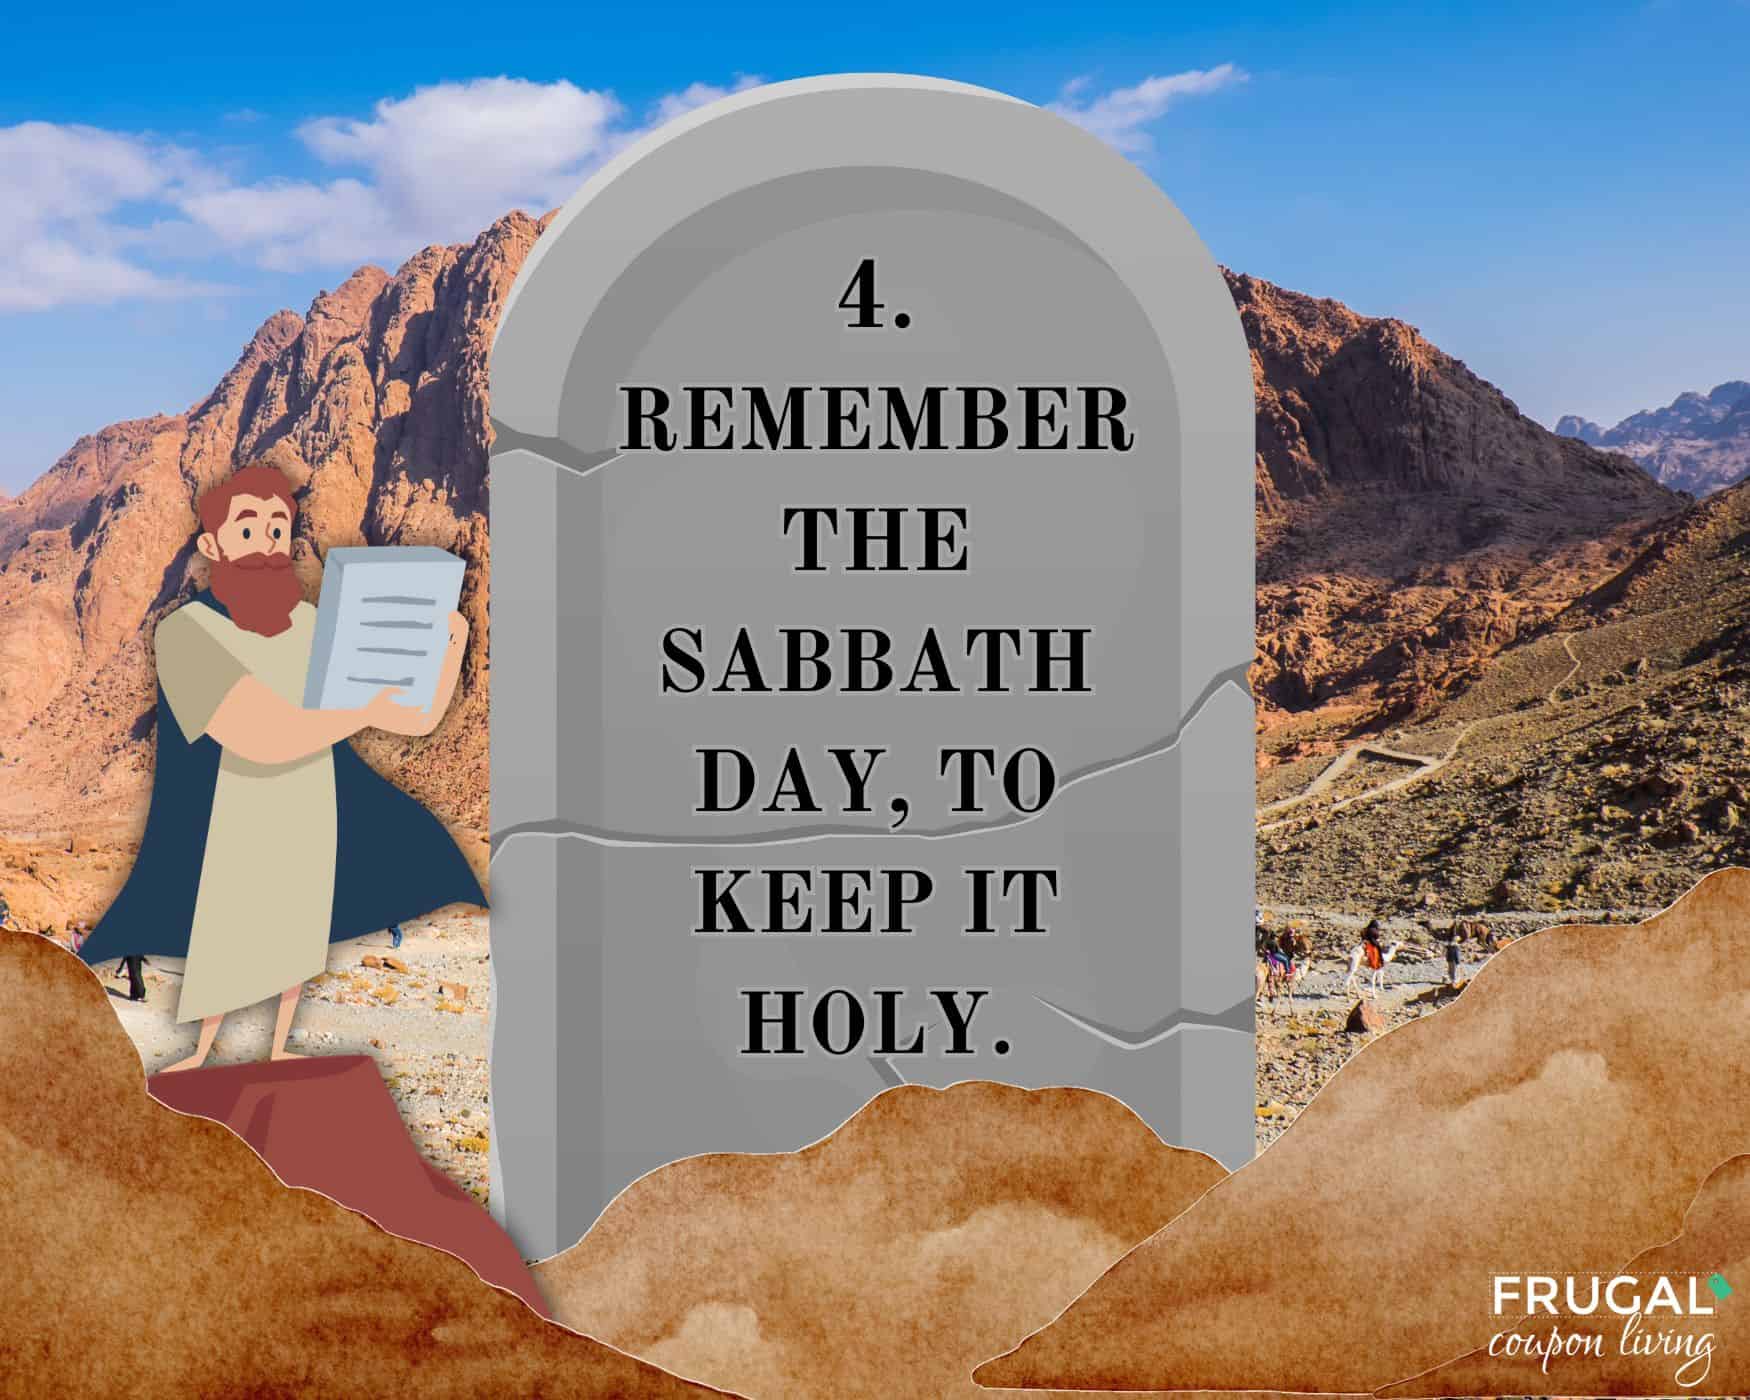 Remember the Sabbath day, to keep it holy fourth commandment tablet